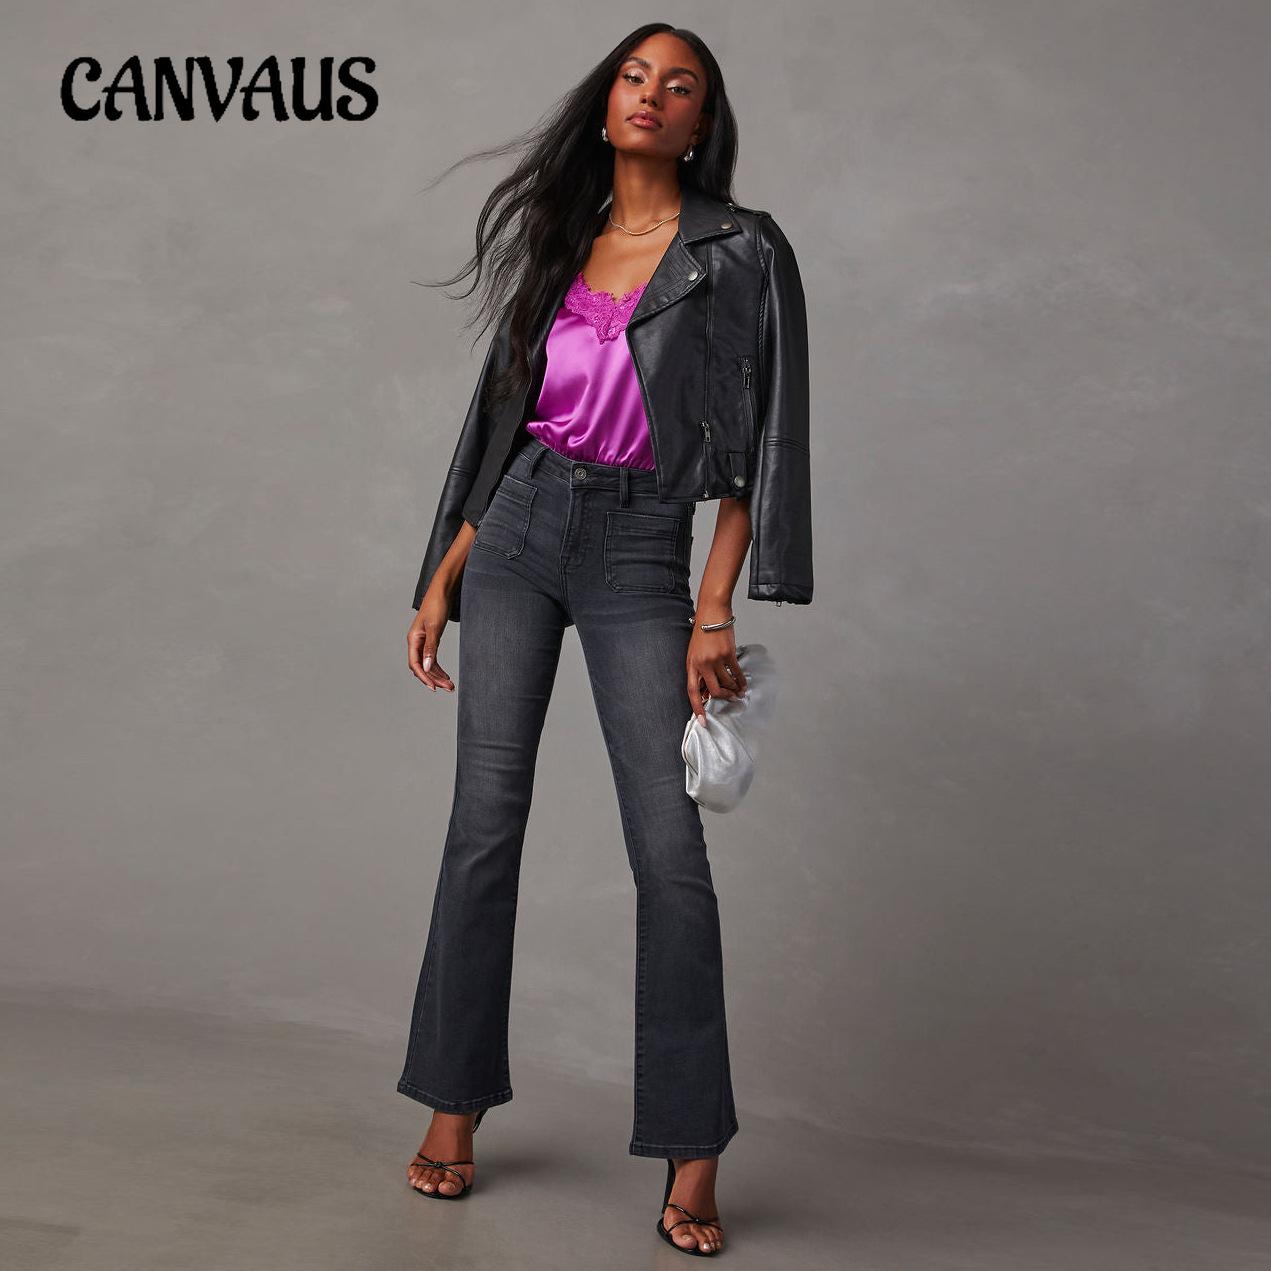 CANVAUS Spring, Summer and Autumn Women's Jeans Retro High-waisted Pant Thin Elastic Trousers Micro Flare Jeans